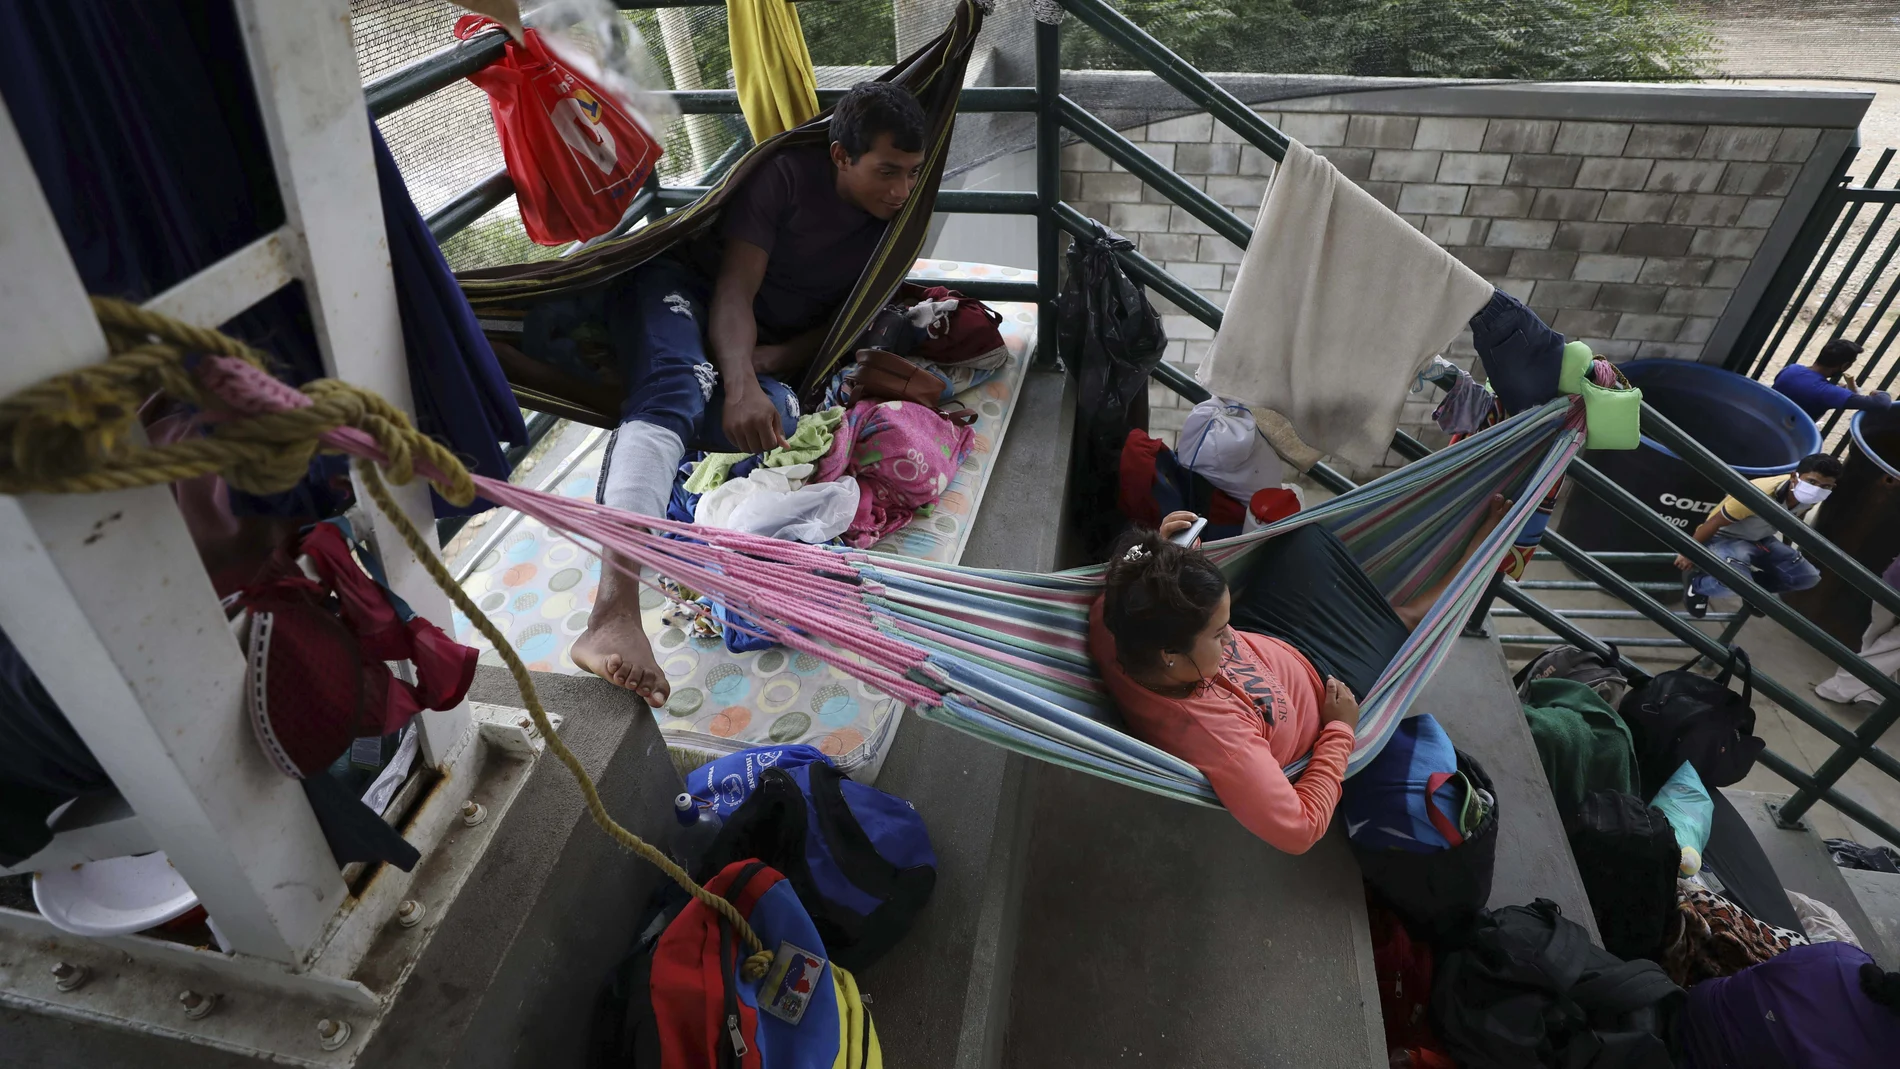 Venezuelans rest at a community center being used as a shelter in Arauquita, Colombia, Thursday, March 25, 2021, on the border with Venezuela. Thousands of Venezuelans are seeking shelter in Colombia this week following clashes between Venezuela's military and a Colombian armed group in a community along the nations' shared border. (AP Photo/Fernando Vergara)